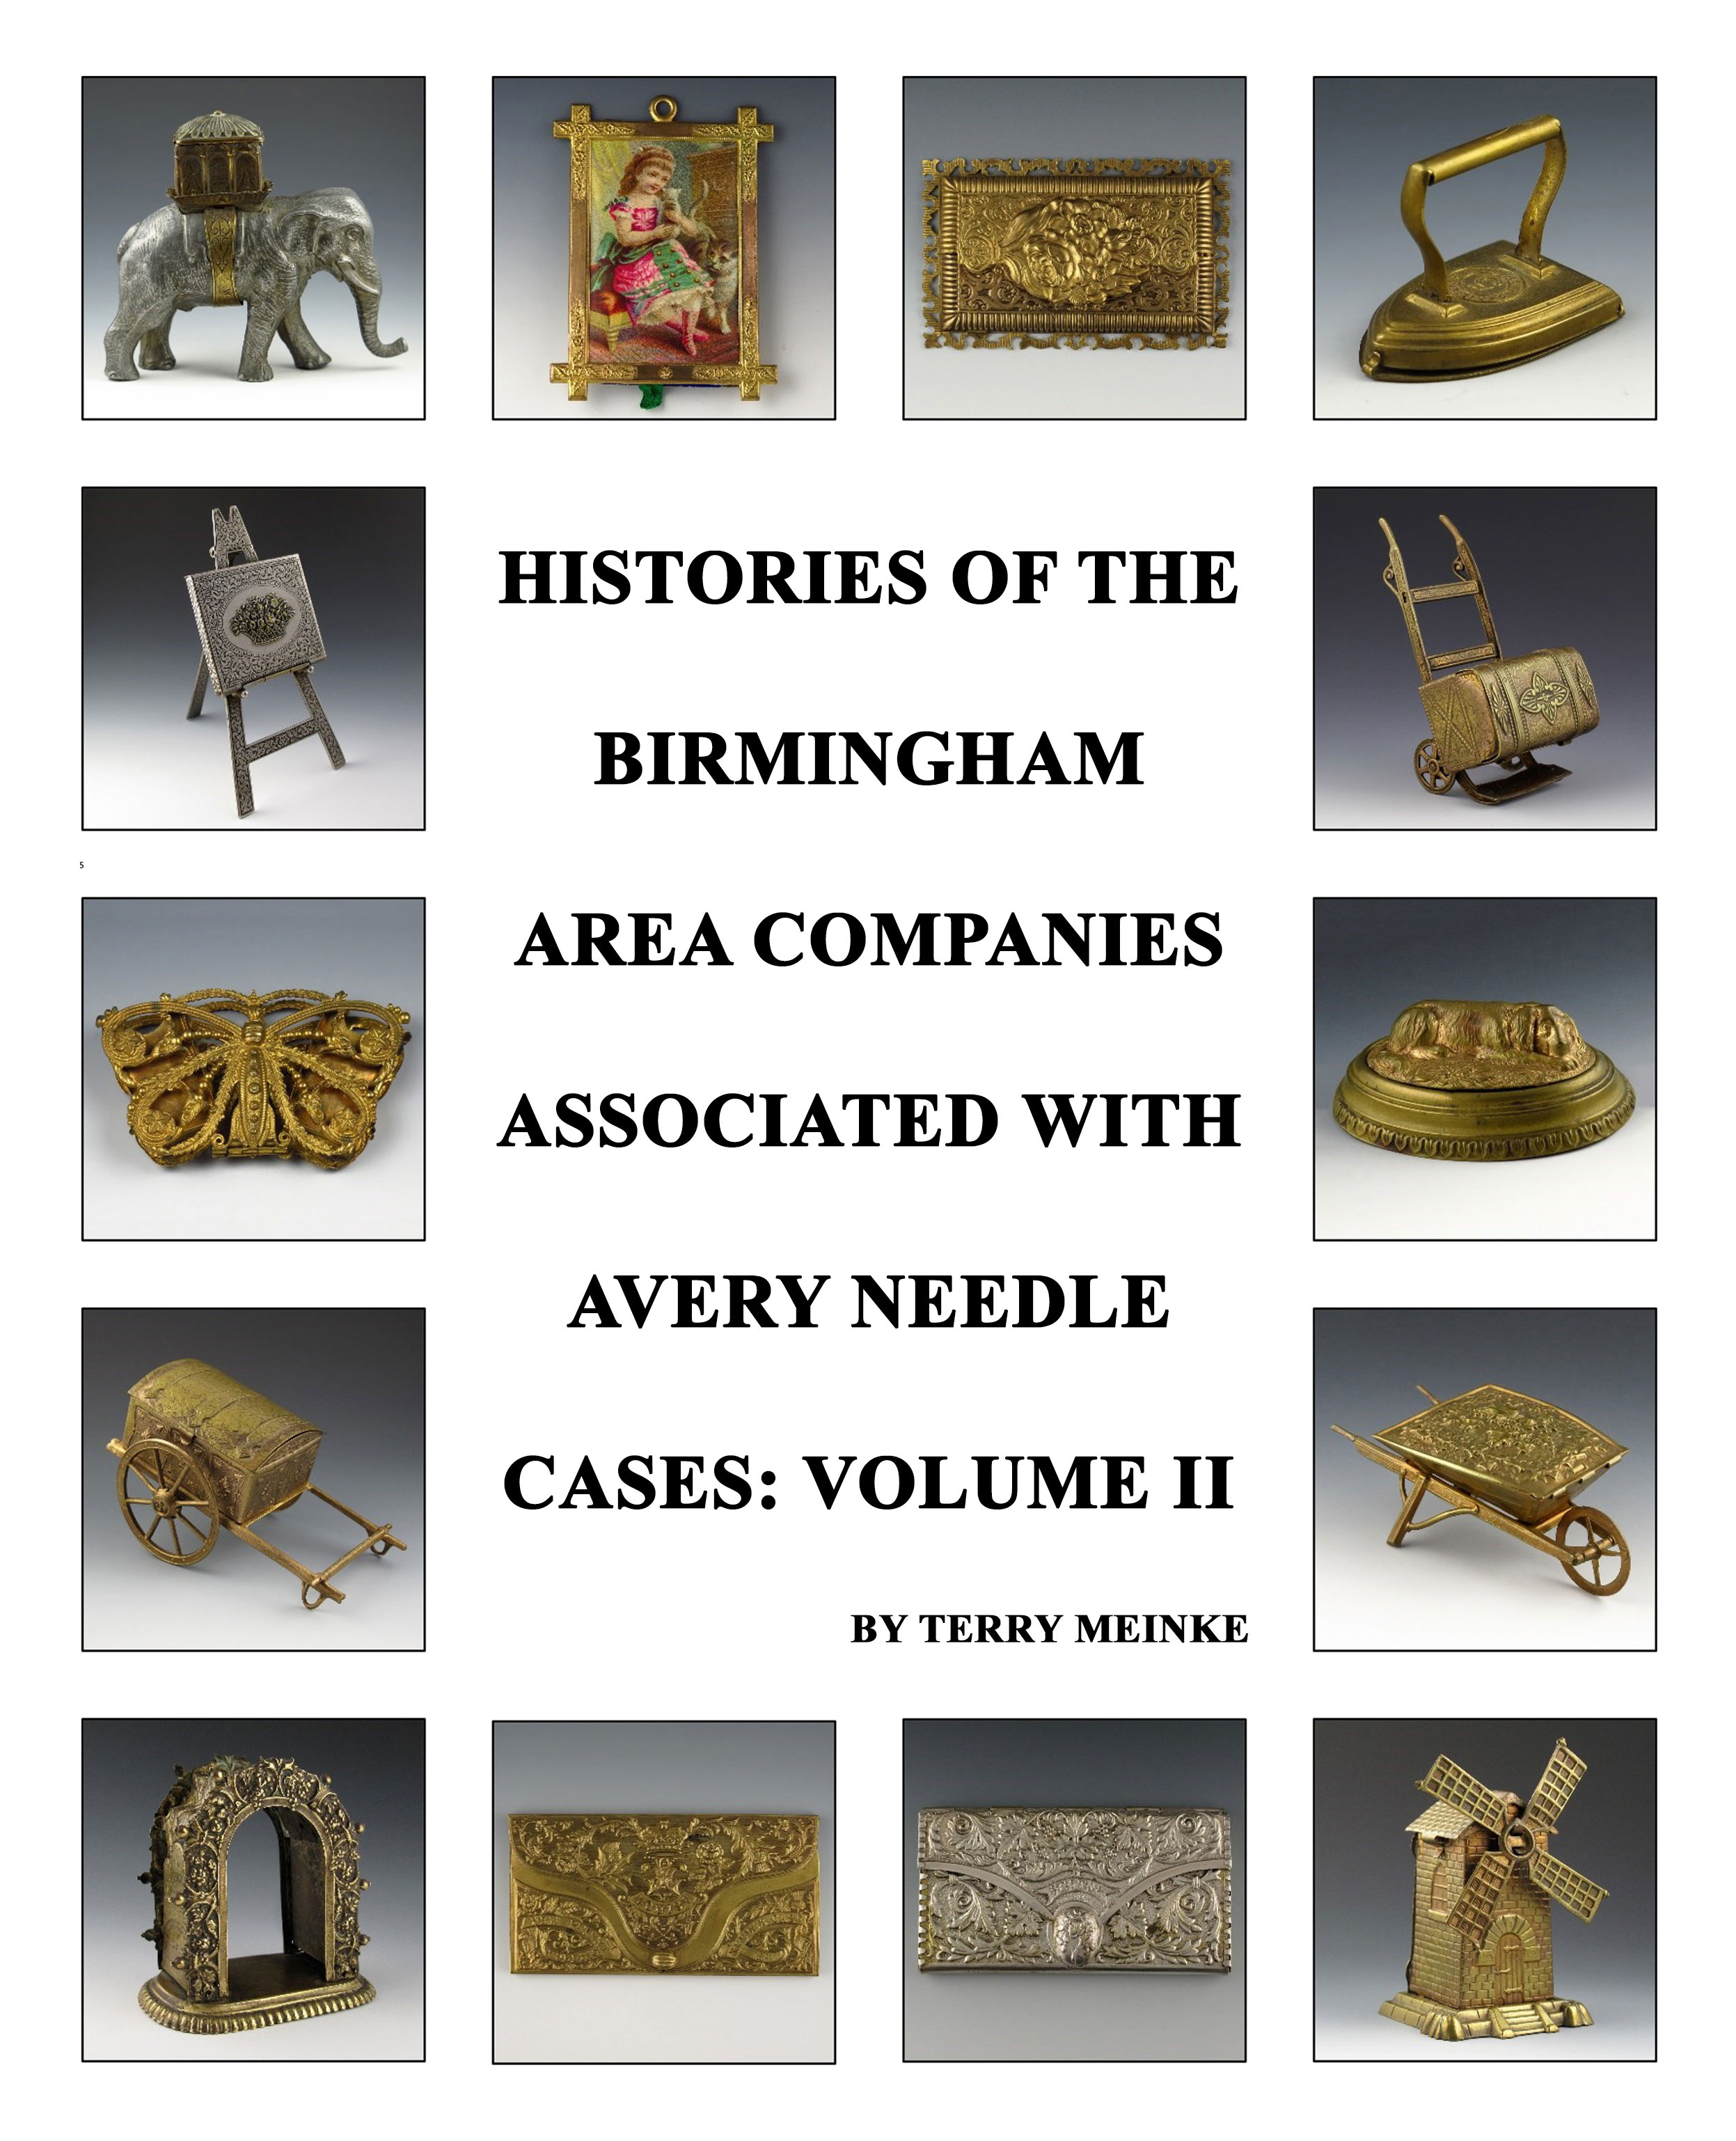 Histories of the Birmingham Area Companies Associated with Avery Needle Cases